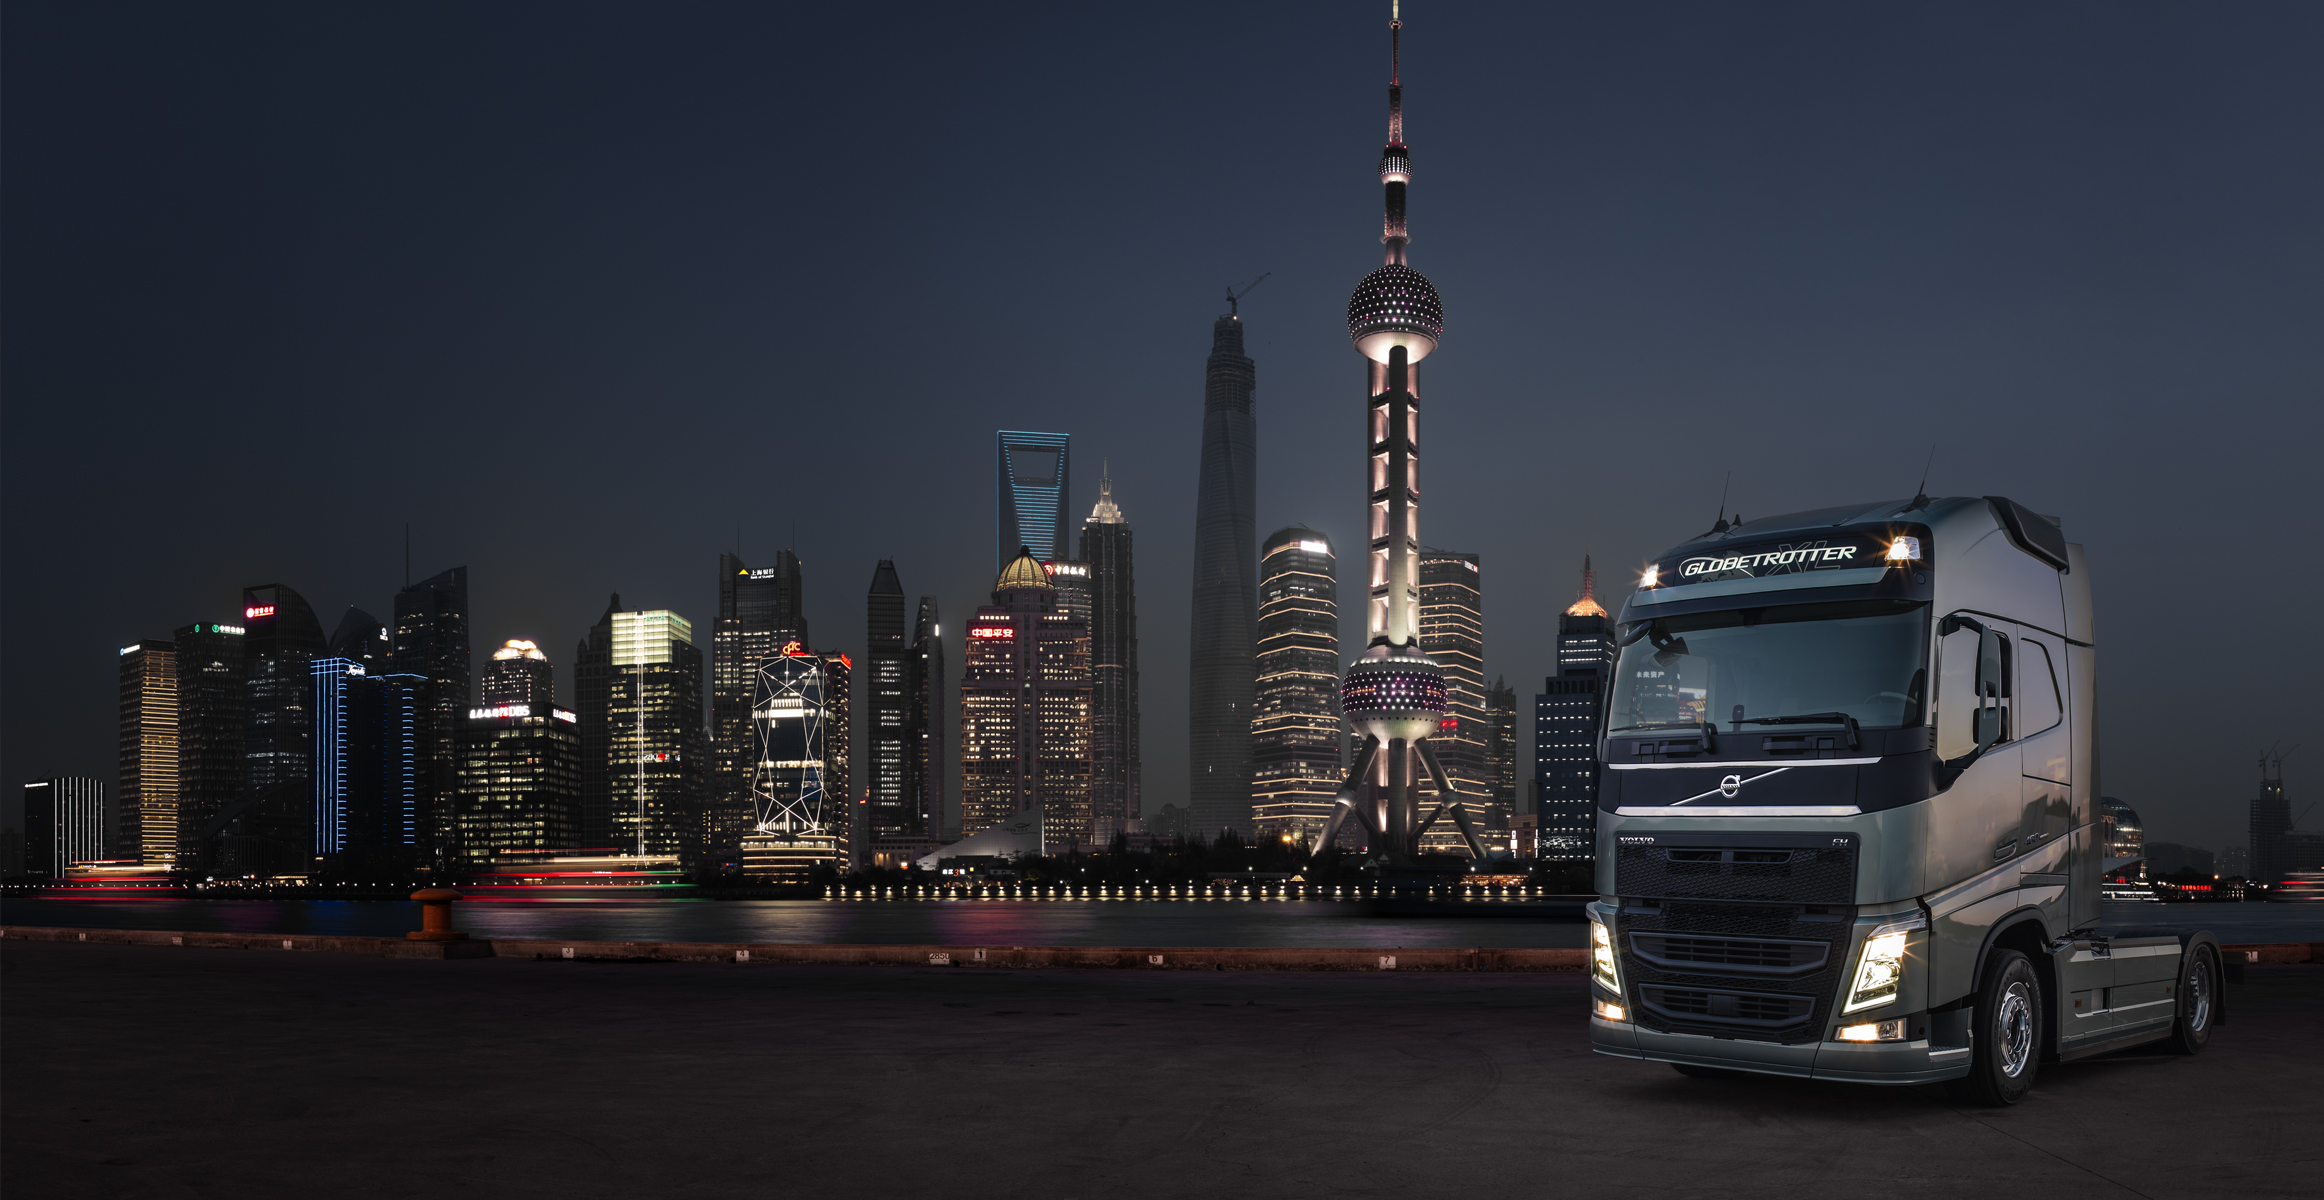 Volvo trucks about us contact city night truck